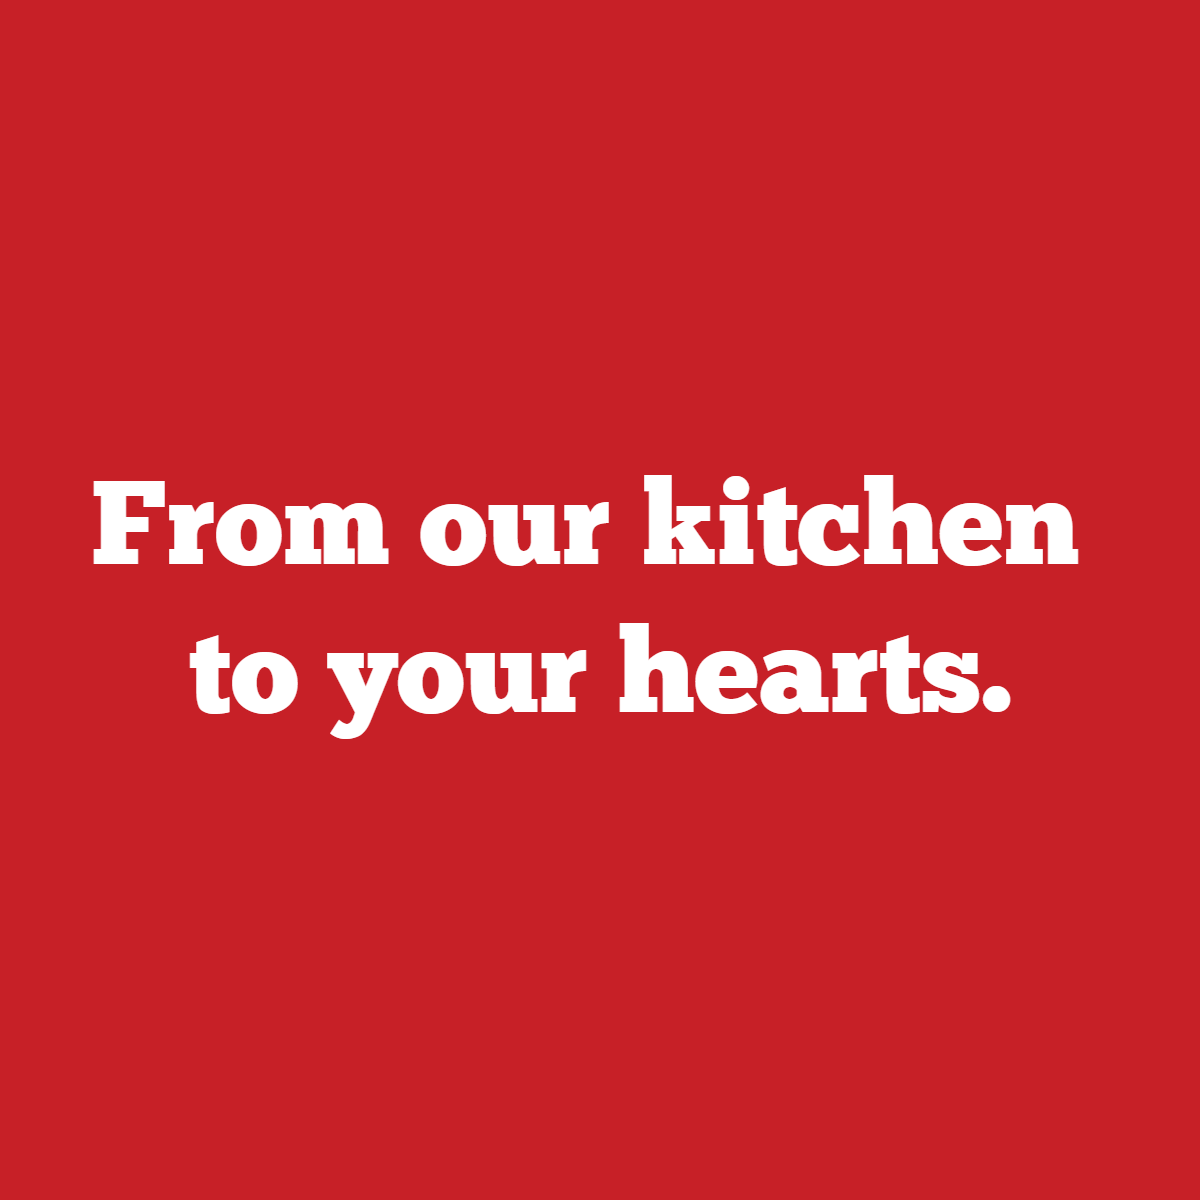 We cook everything with one goal in mind: to make you fall in love. Come on down to see us whenever you’re hungry, Moorestown!